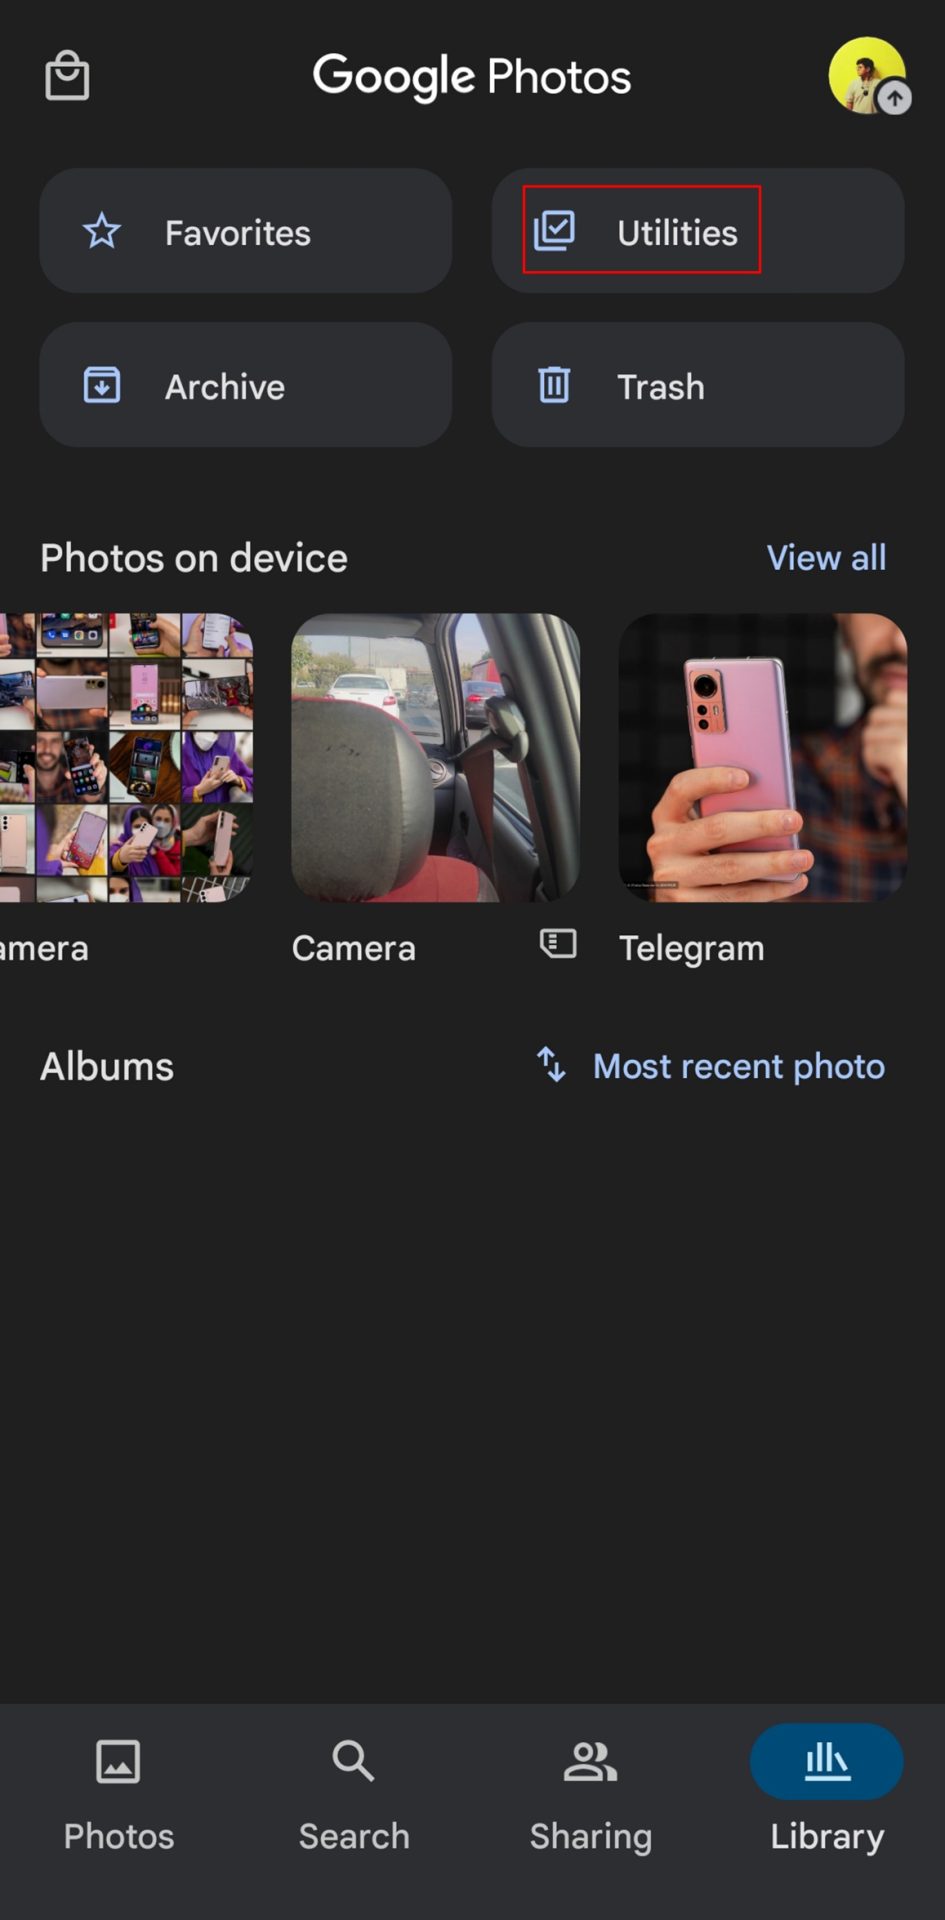 Screenshot of Google Photos with a red line drawn around the utilities option